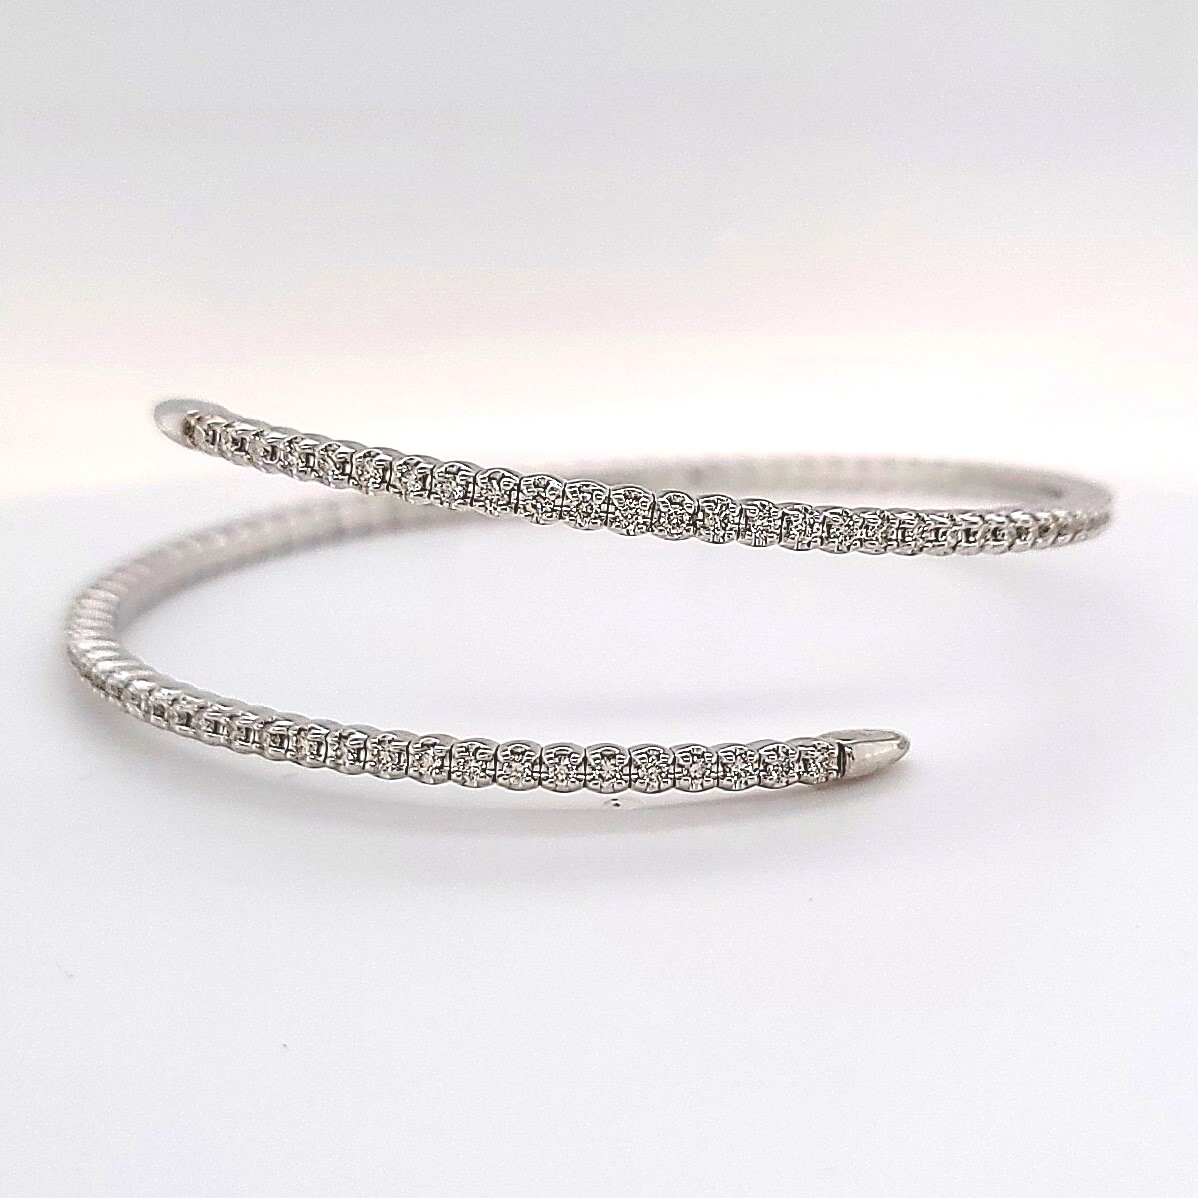 14KT White Gold Diamond Eloise Baguette Bangle | Diamond bangles bracelet, Diamond  bracelet design, Dope jewelry accessories